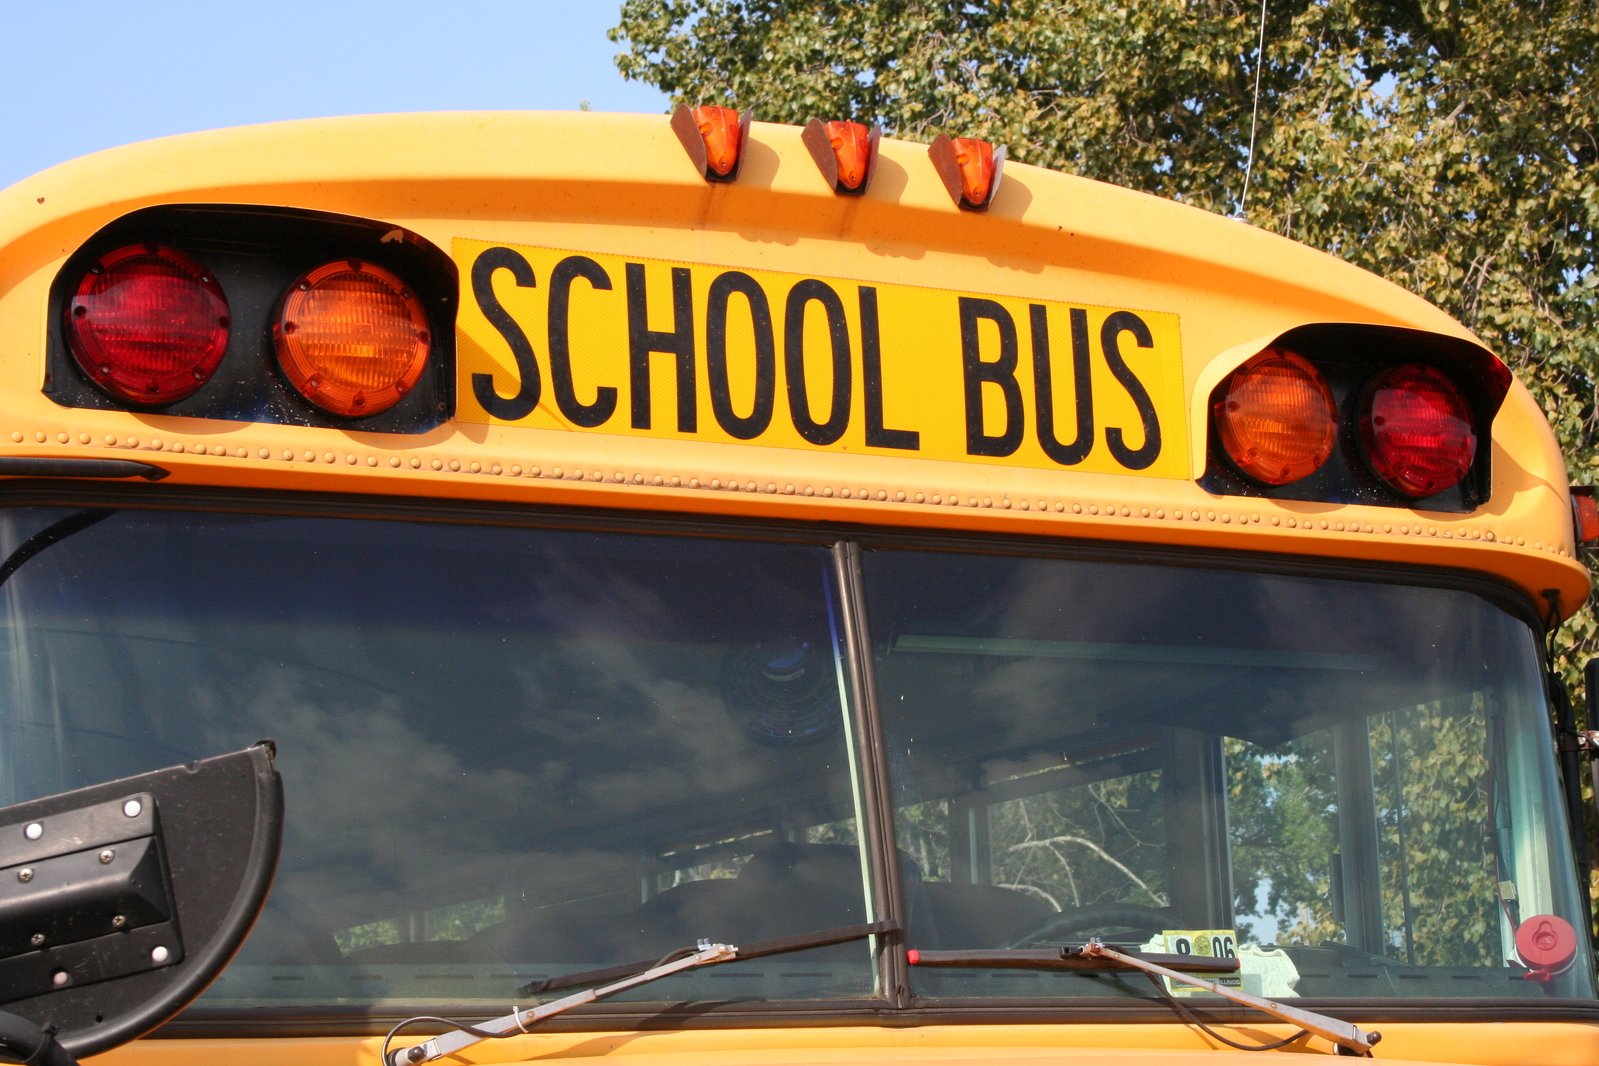 UH Bedford’s ‘Stuff the Bus’ with school supplies starts on July 12